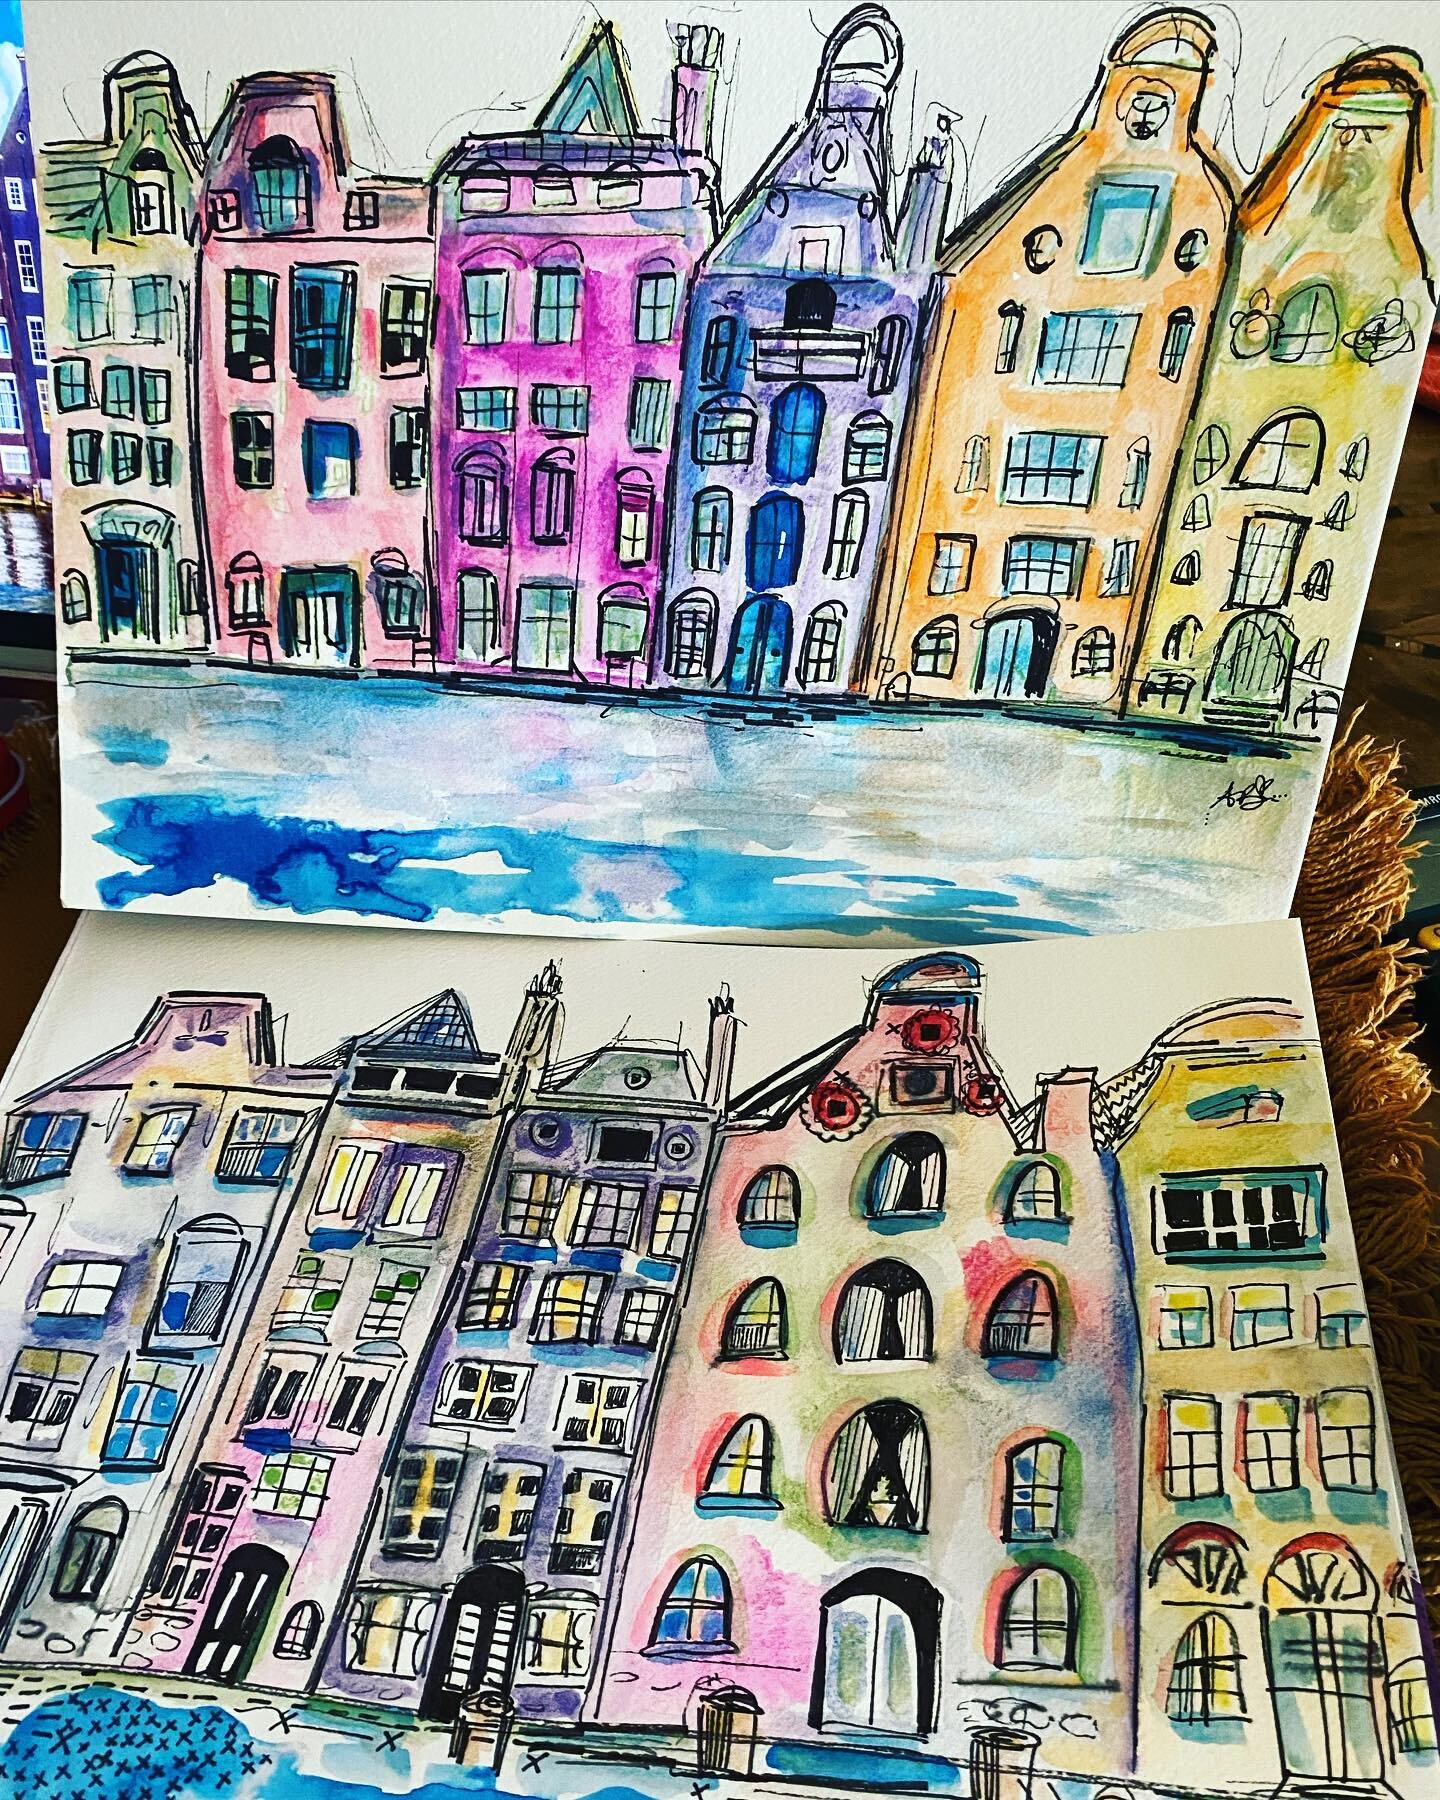 Explosion of colour!! 💙💚💛🧡❤️💜🤎Free style watercolours and artist pen studies both together. Around the World Series. 🌎 🇳🇱 
.
.
#inks #watercolours #ashebickillustrations #quirkycityscapes #artist #illustrator #amsterdam #amsterdamcanals #ams